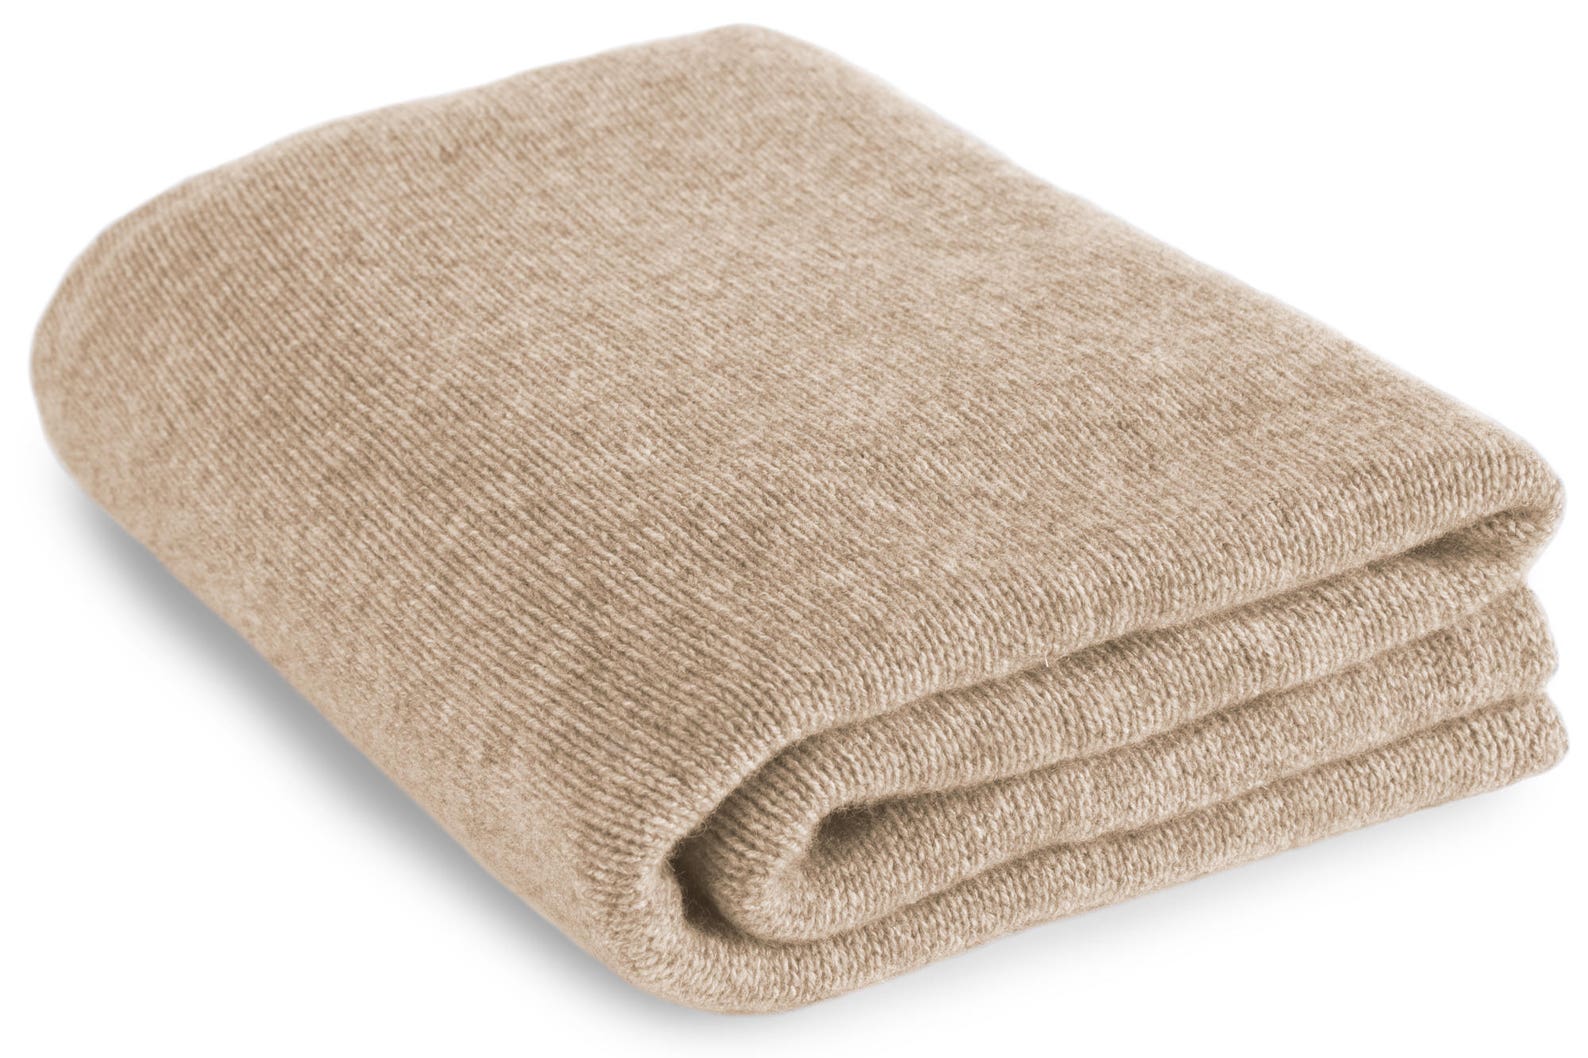 Cashmere Blanket. Сплав Blanket. Blanket Wrapped. Плед кашемир